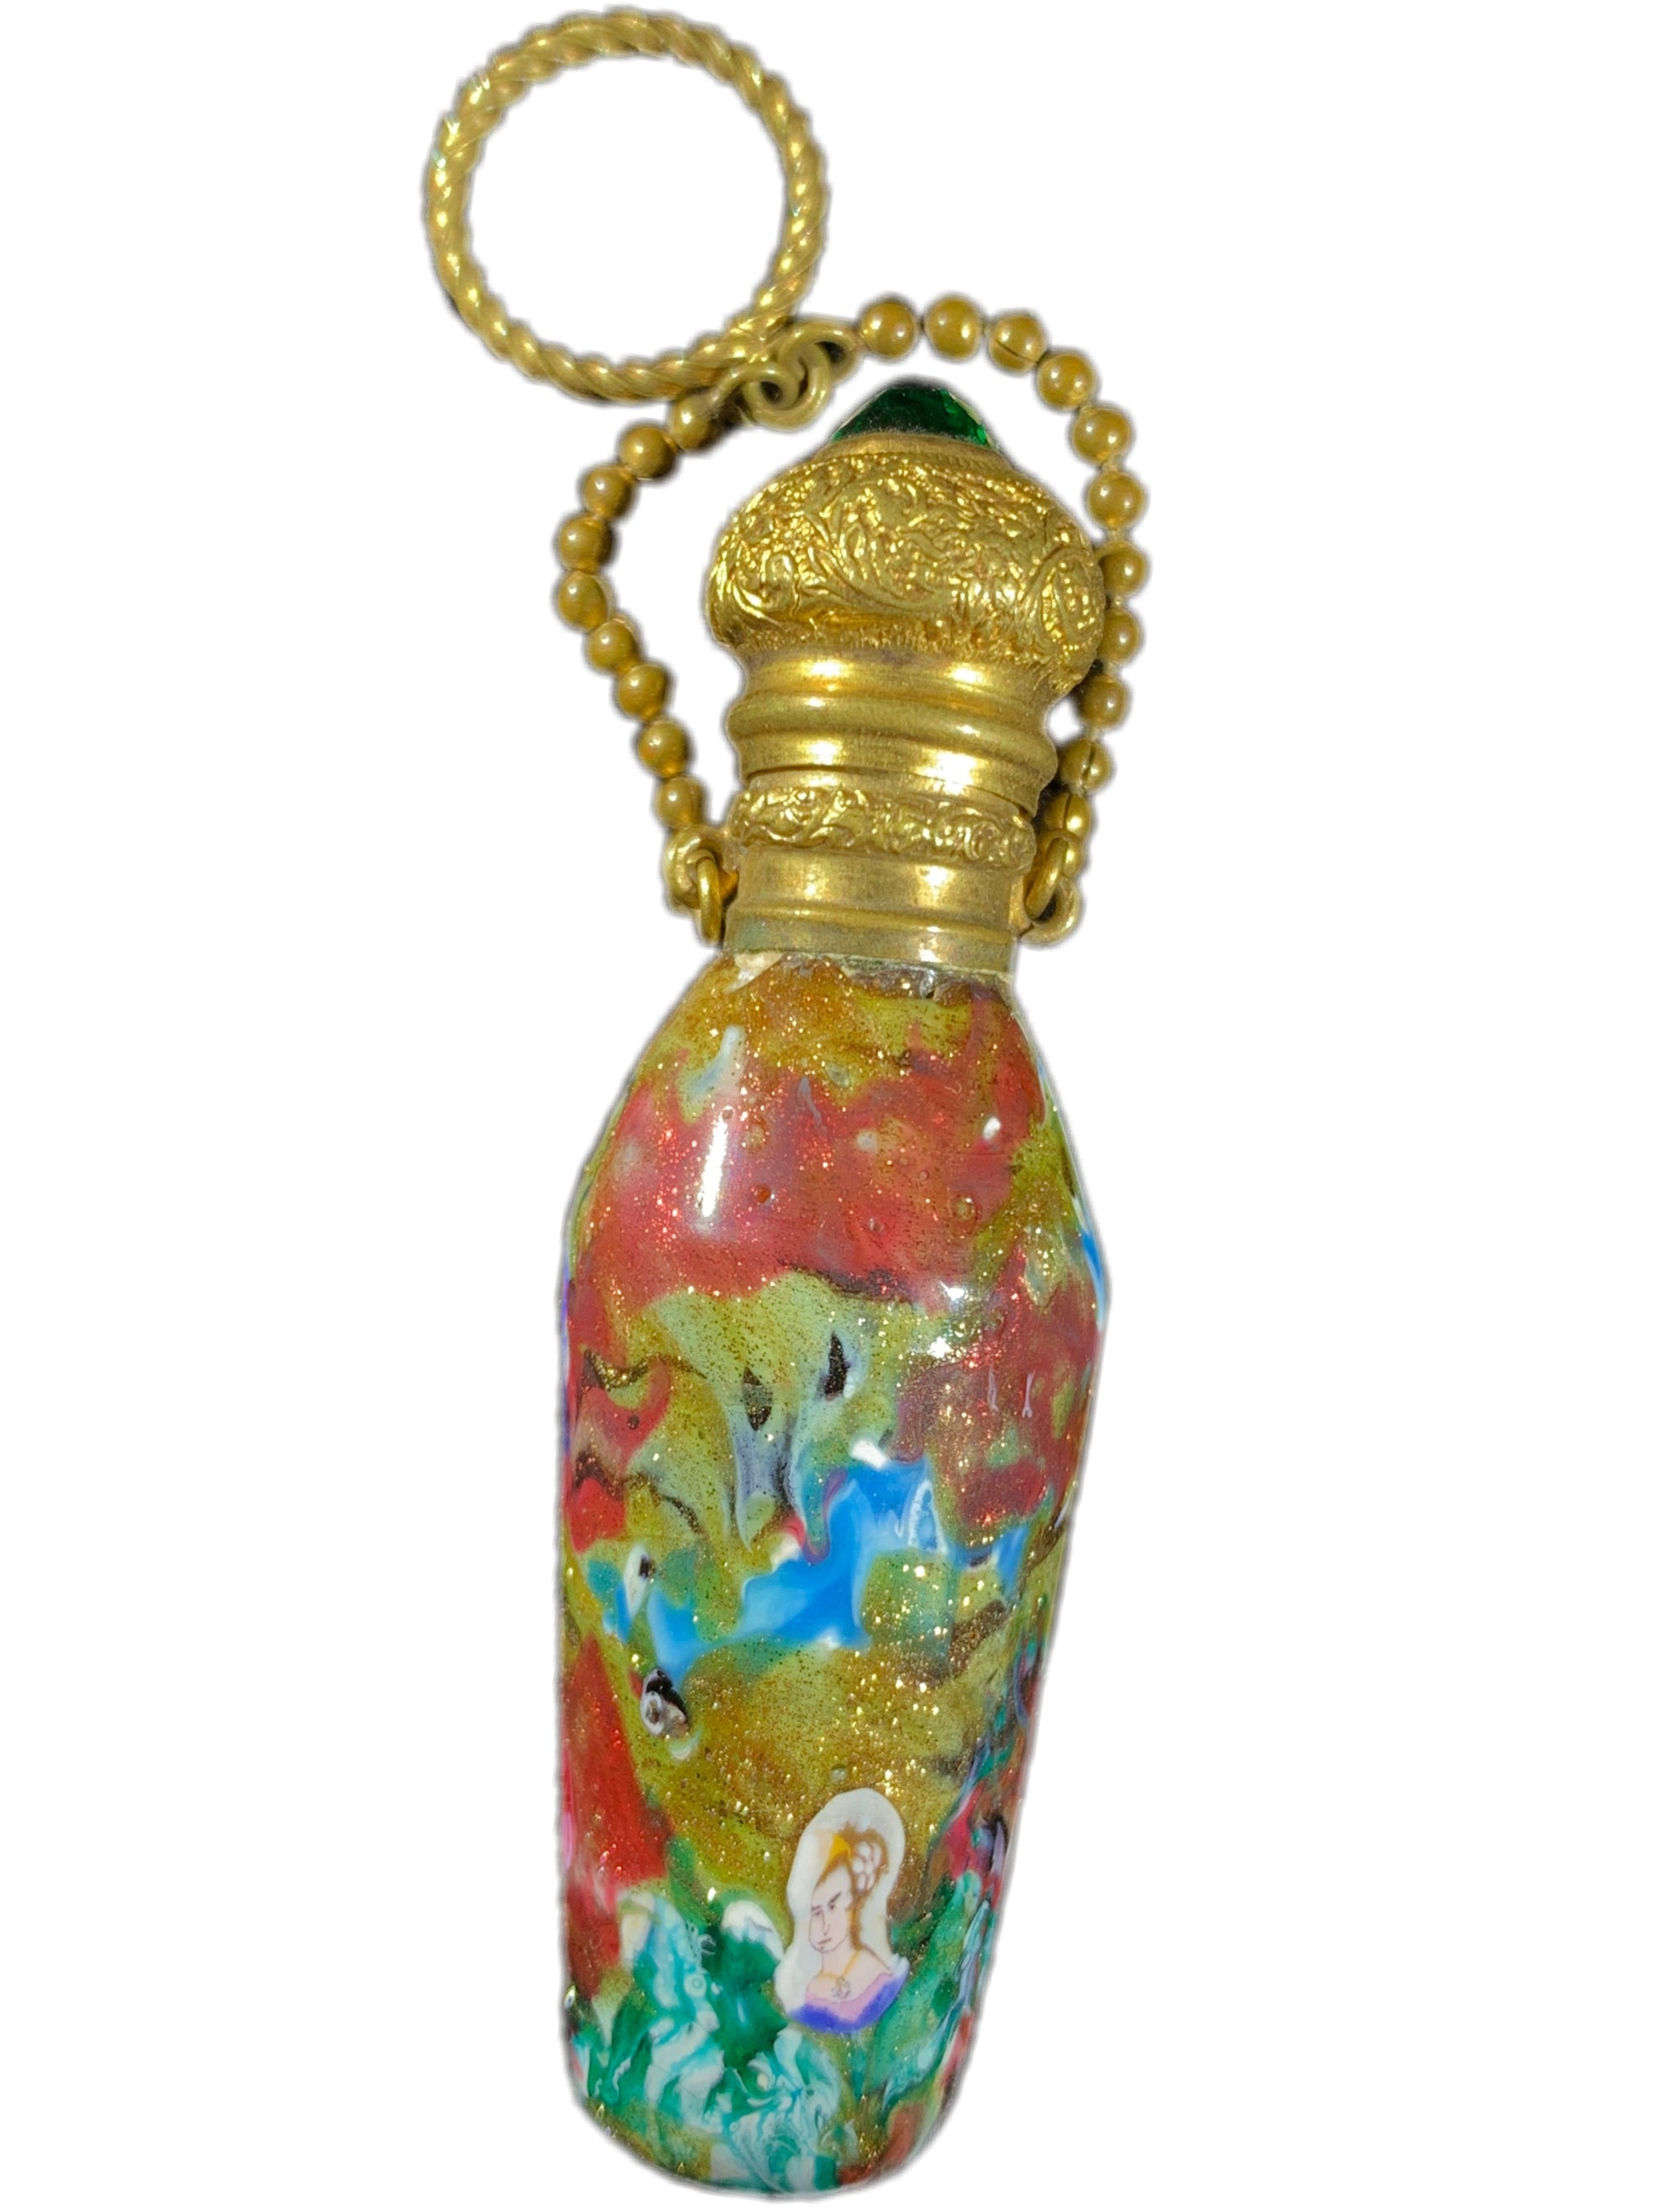 Antique Venetian Scent Bottle with Murrine of a Woman & Aventurine